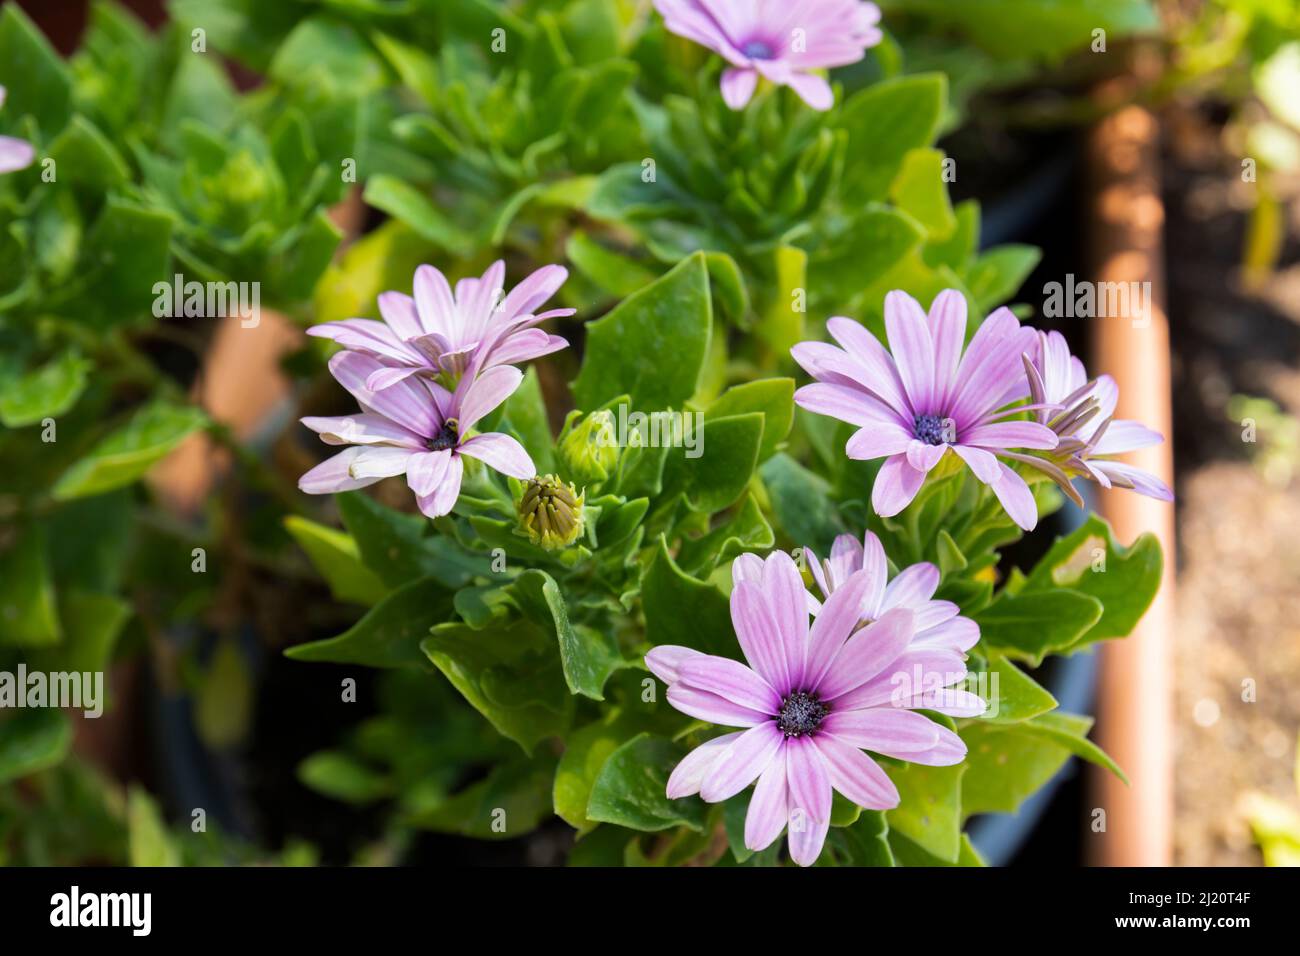 Dimorphotheca ecklonis, also known as Cape marguerite, Van Staden's river daisy, blue and white daisy bush, star of the veldt is an ornamental plant Stock Photo